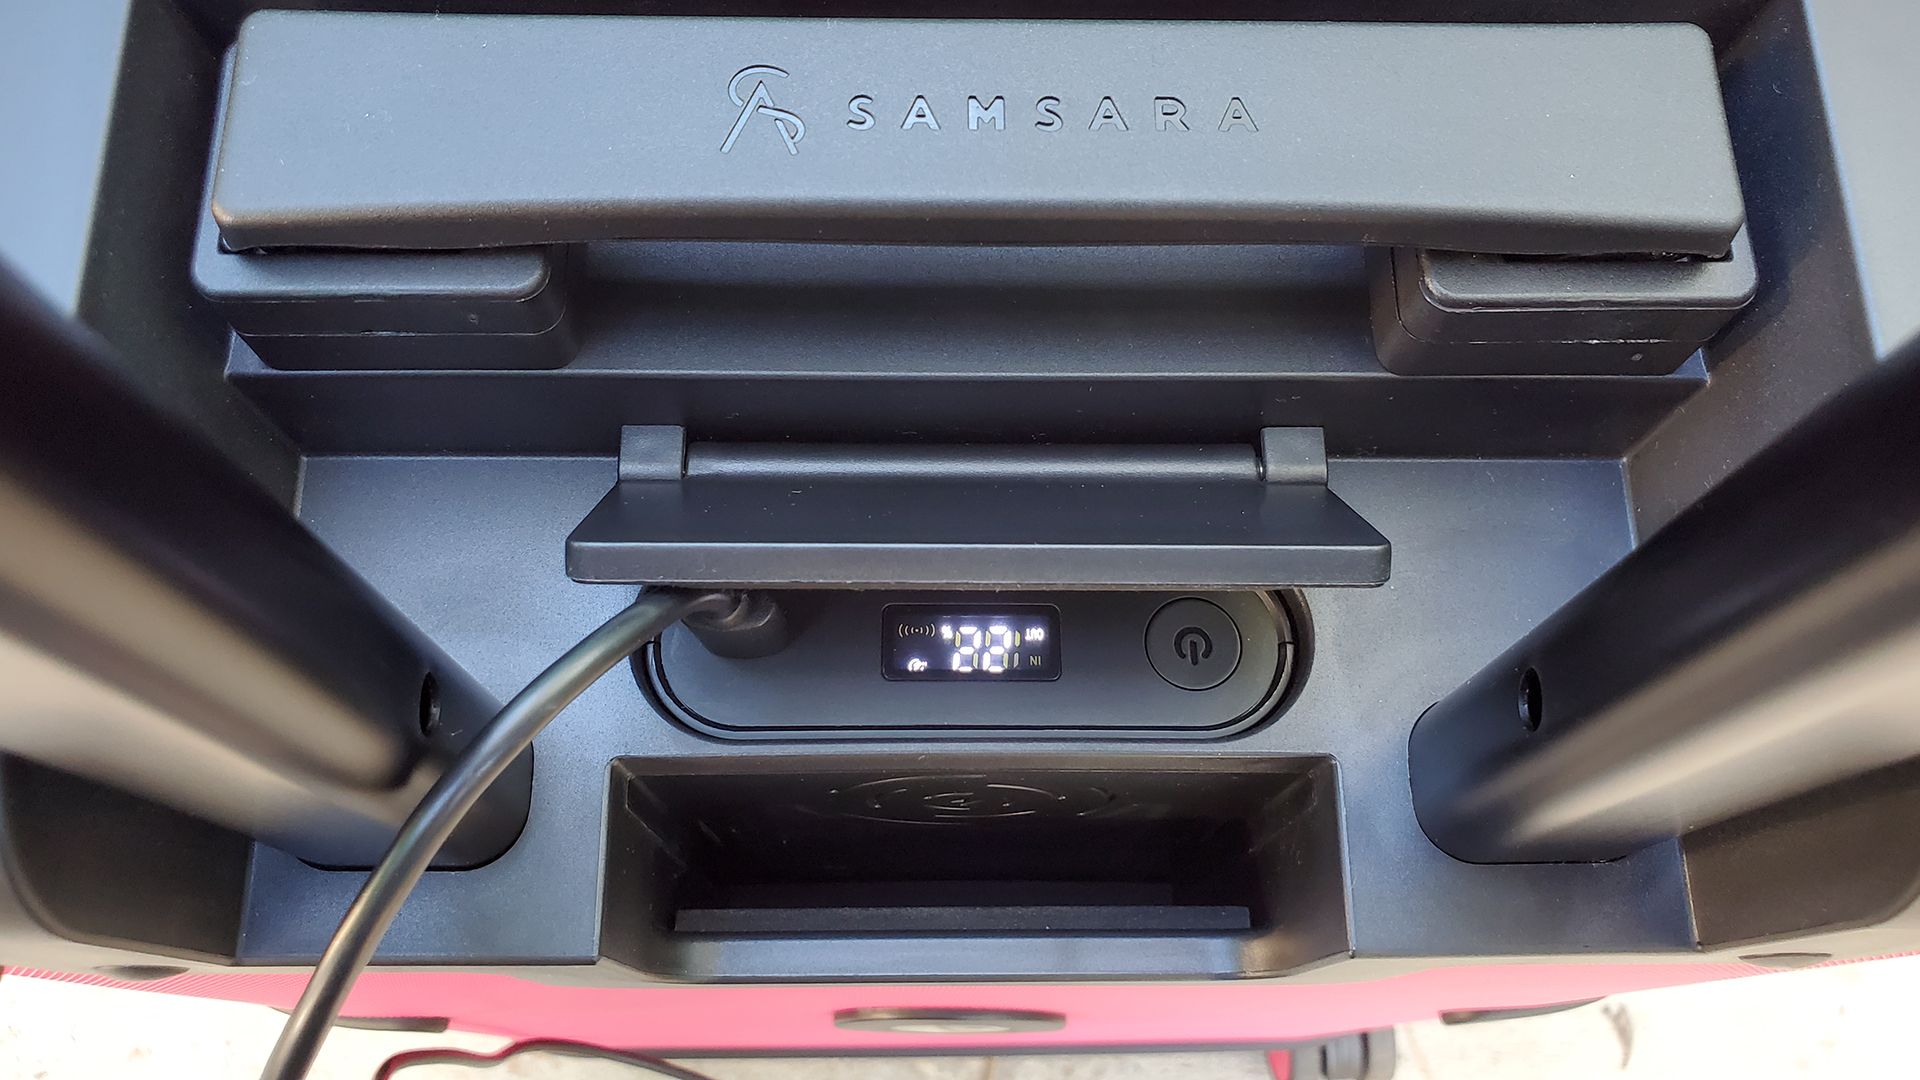 The T-Mobile Samsara Un-carrier On smart suitcase with the battery connected to a USB-C cable.